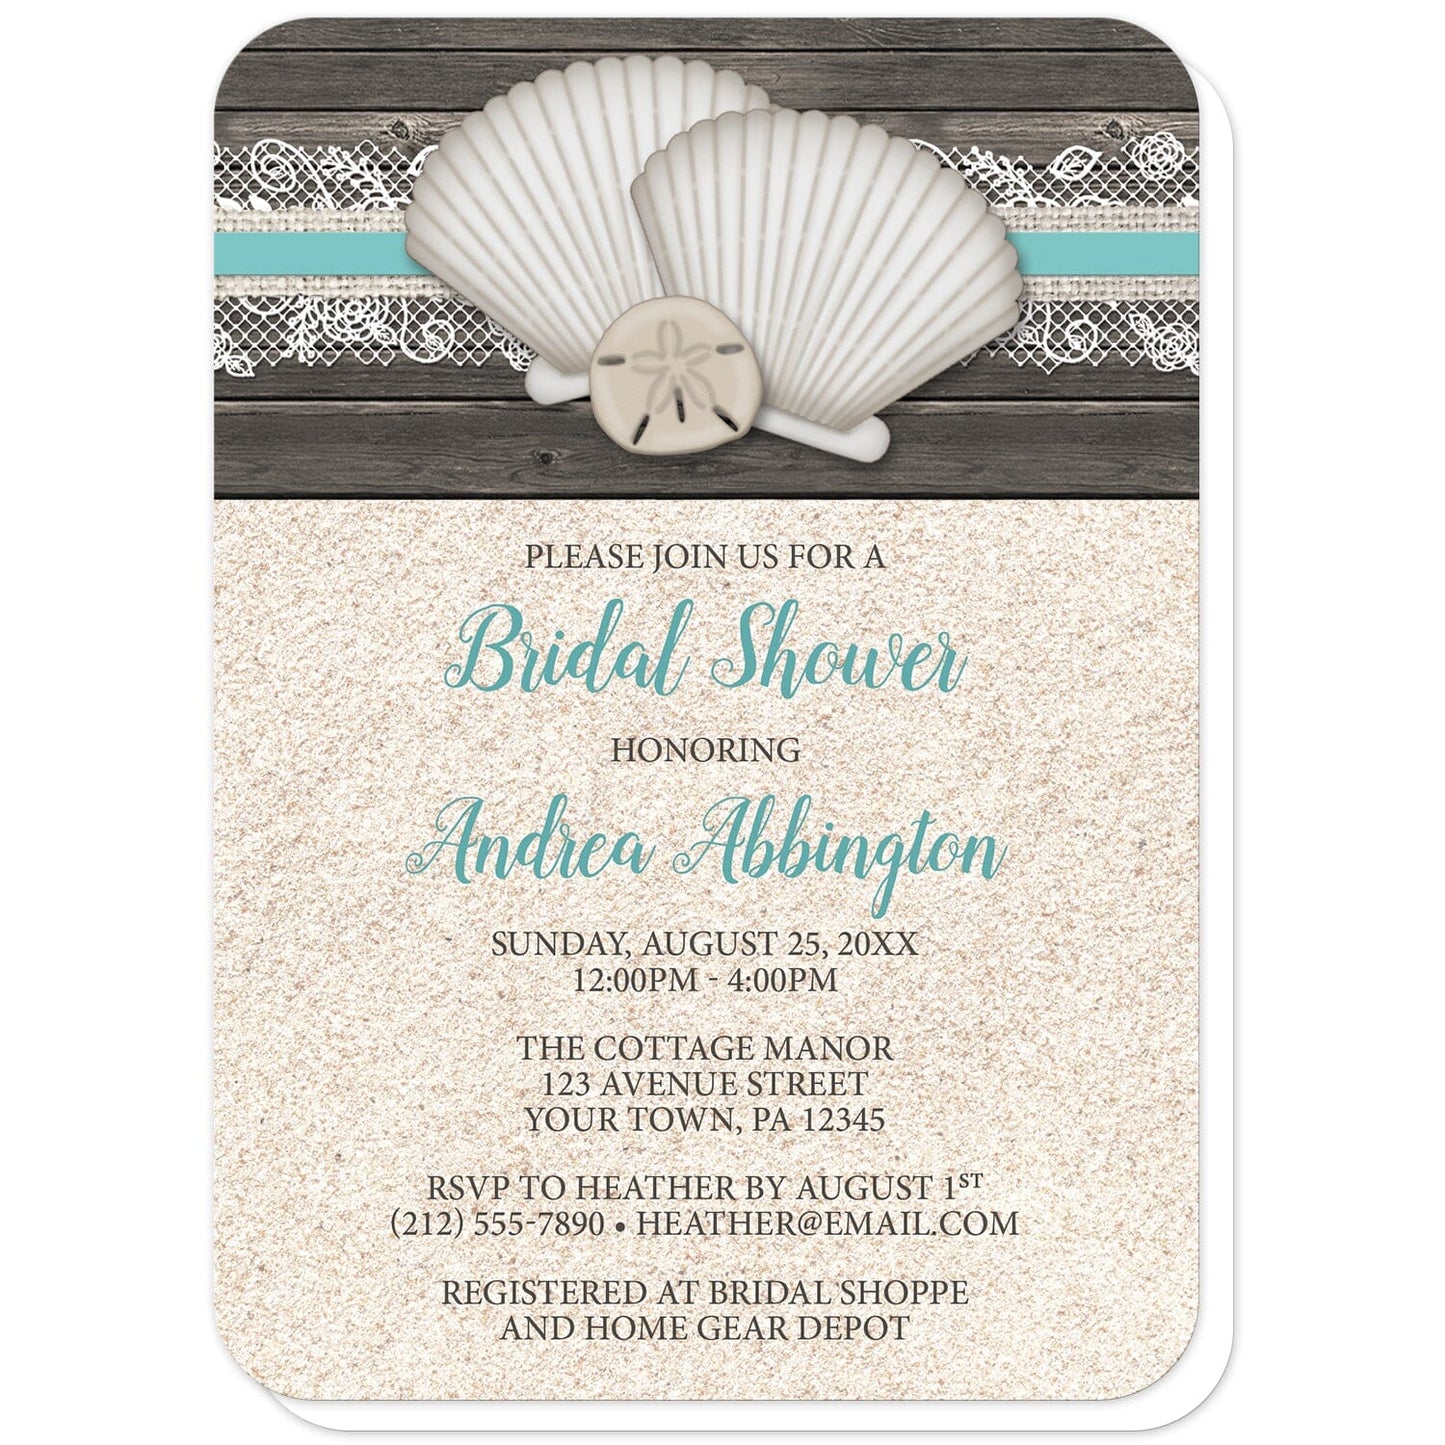 Seashell Lace Wood and Sand Beach Bridal Shower Invitations (with rounded corners) at Artistically Invited. Rustic seashell lace wood and sand beach bridal shower invitations with two seashells and a sand dollar on a teal, burlap and lace ribbon over a dark brown wood pattern along the top. Your personalized bridal shower celebration details are custom printed in dark brown and teal over a beige sand background design below the seashells.